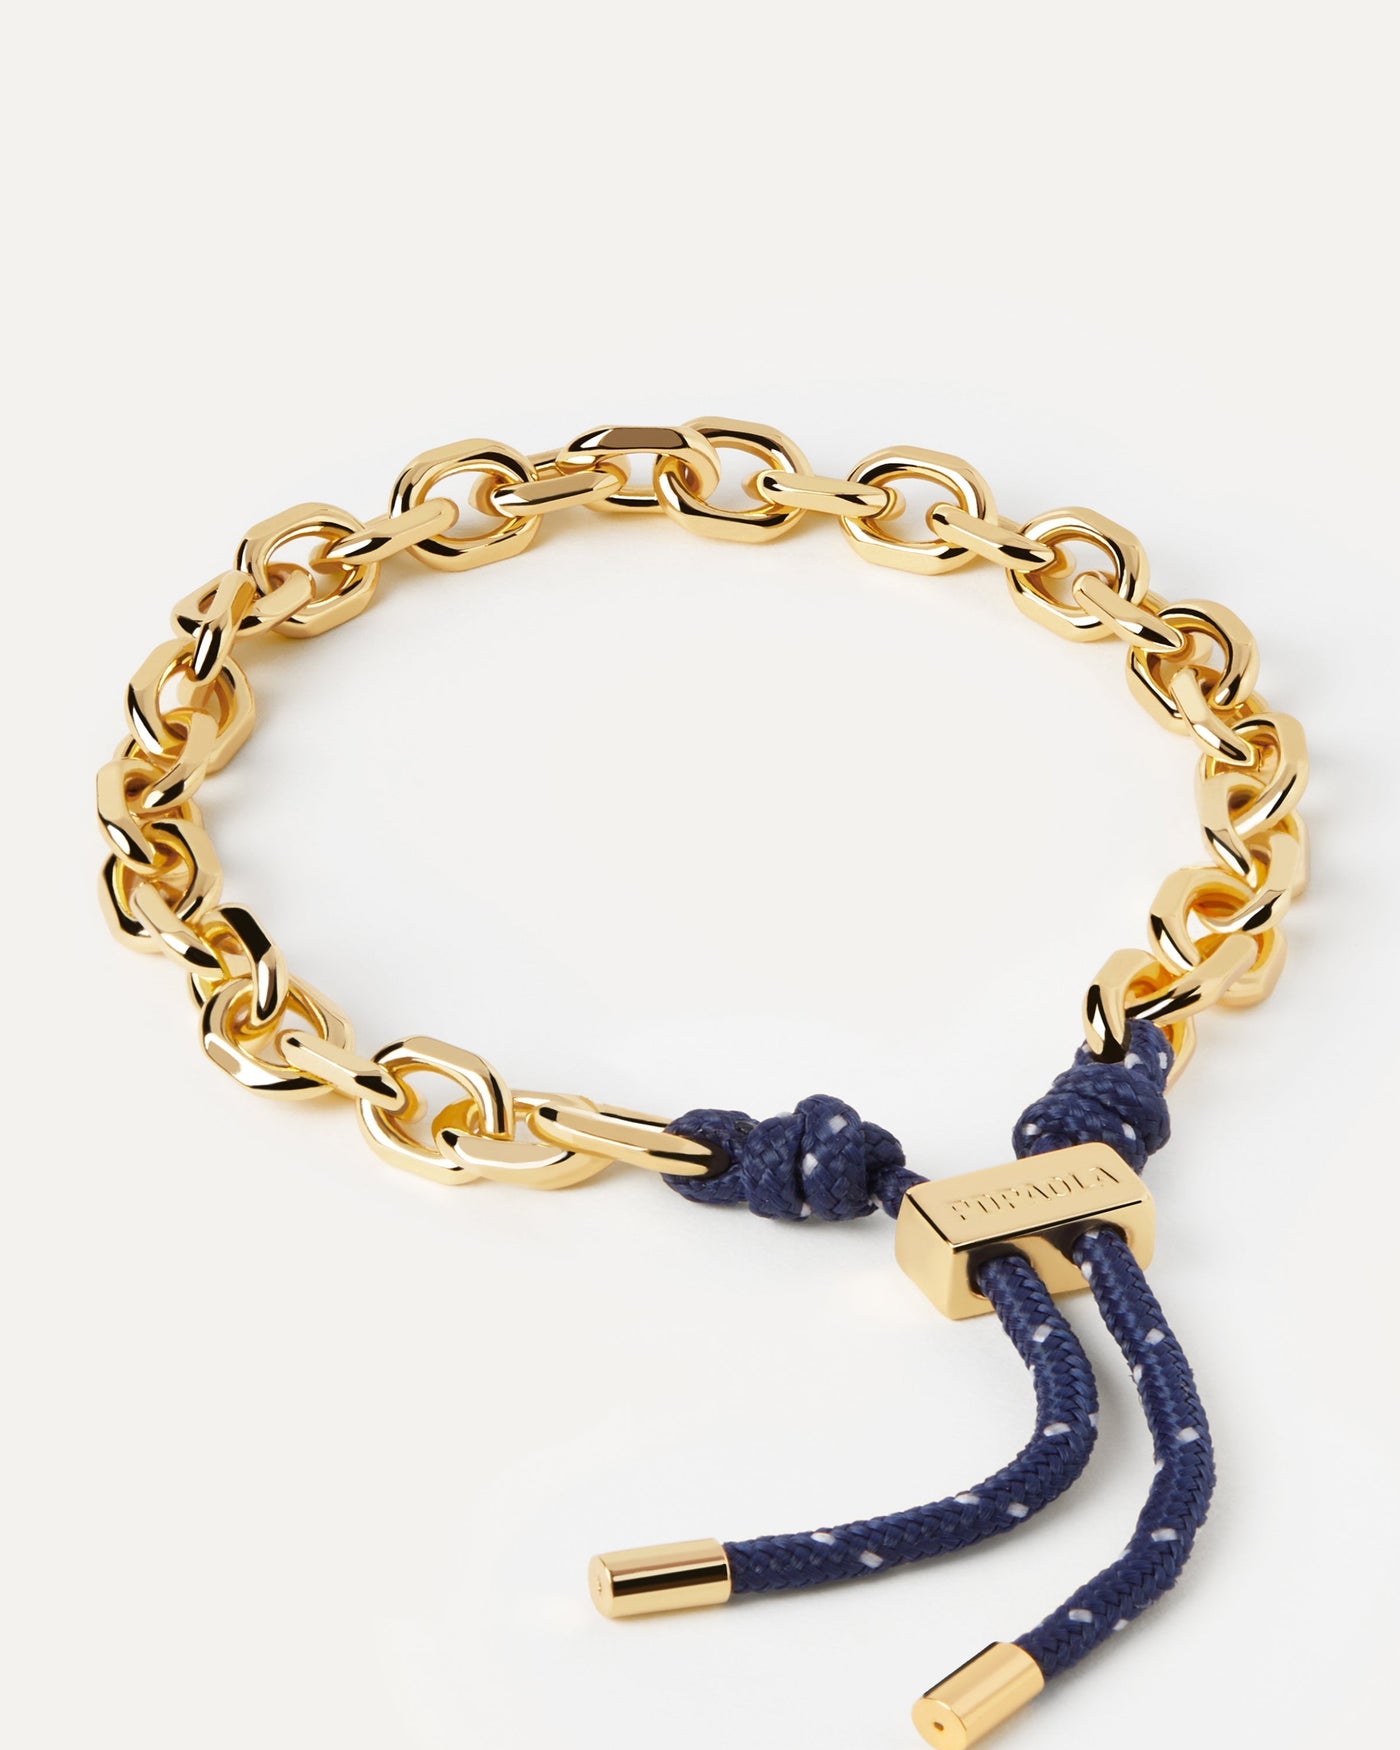 2023 Selection | Midnight Essential Rope and Chain Bracelet. Silver chain bracelet with interwined navy blue rope and adjustable sliding clasp. Get the latest arrival from PDPAOLA. Place your order safely and get this Best Seller. Free Shipping.